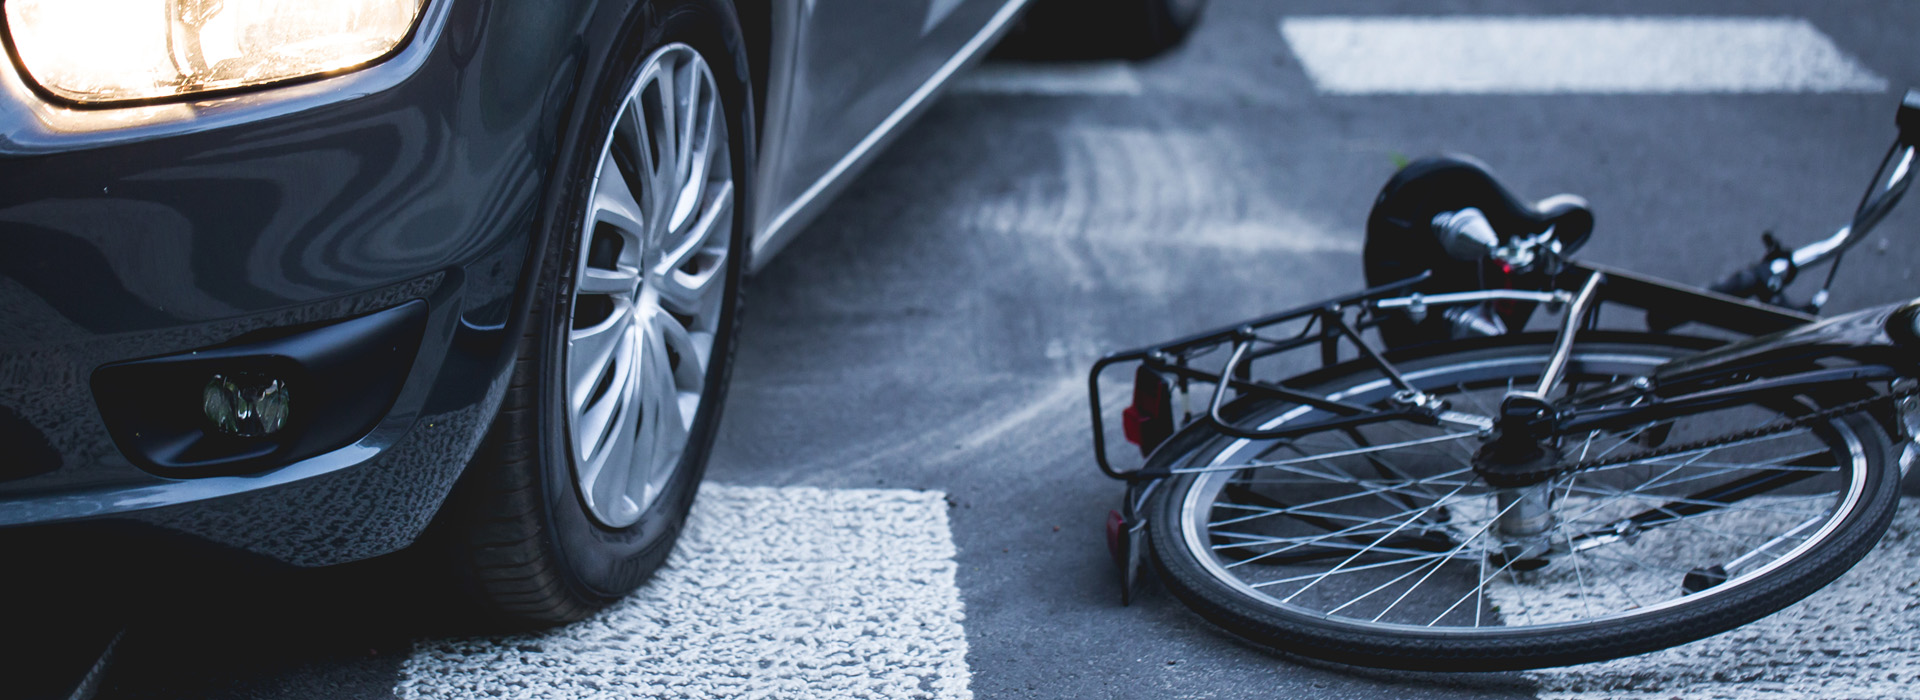 Two Bicyclists Injured in Downtown Phoenix Accident